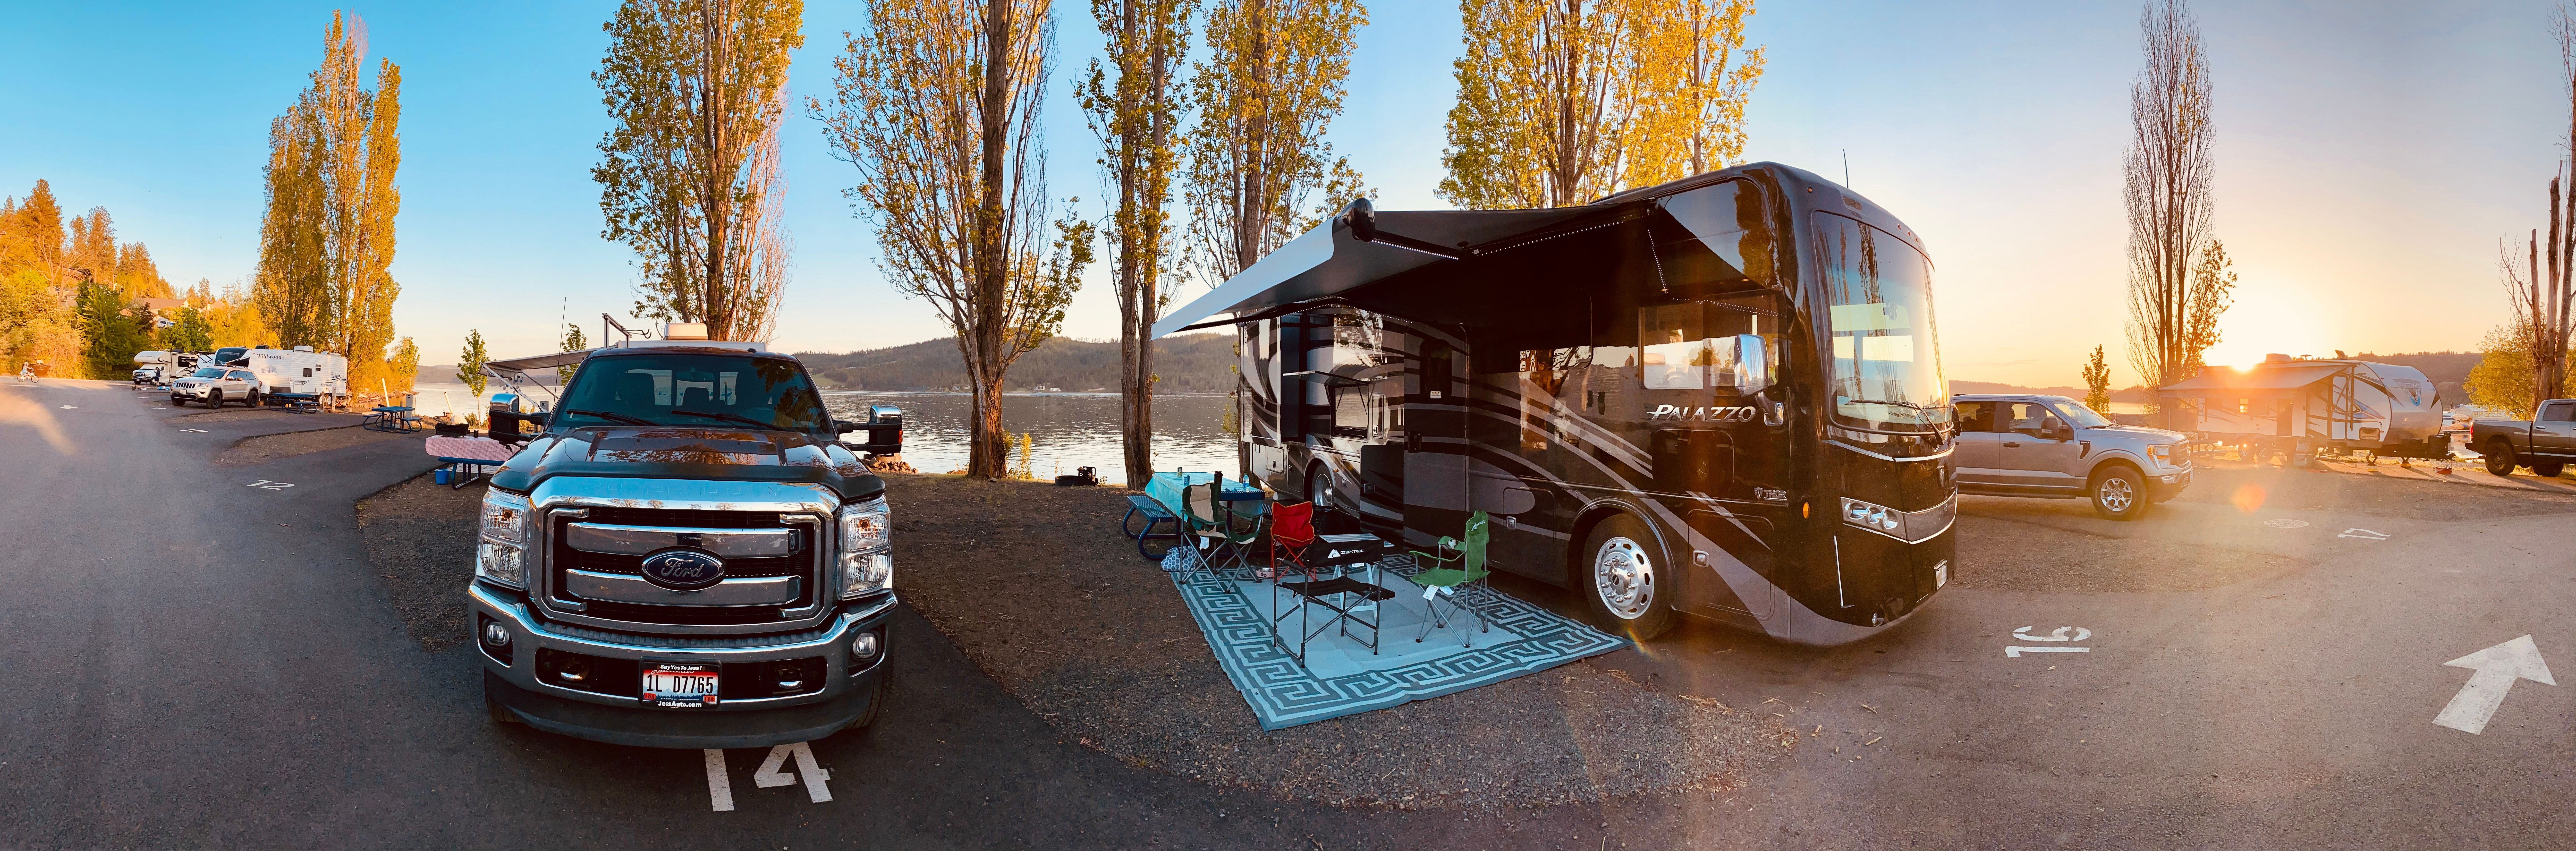 Camper submitted image from City of Harrison RV Park & Campground - 1